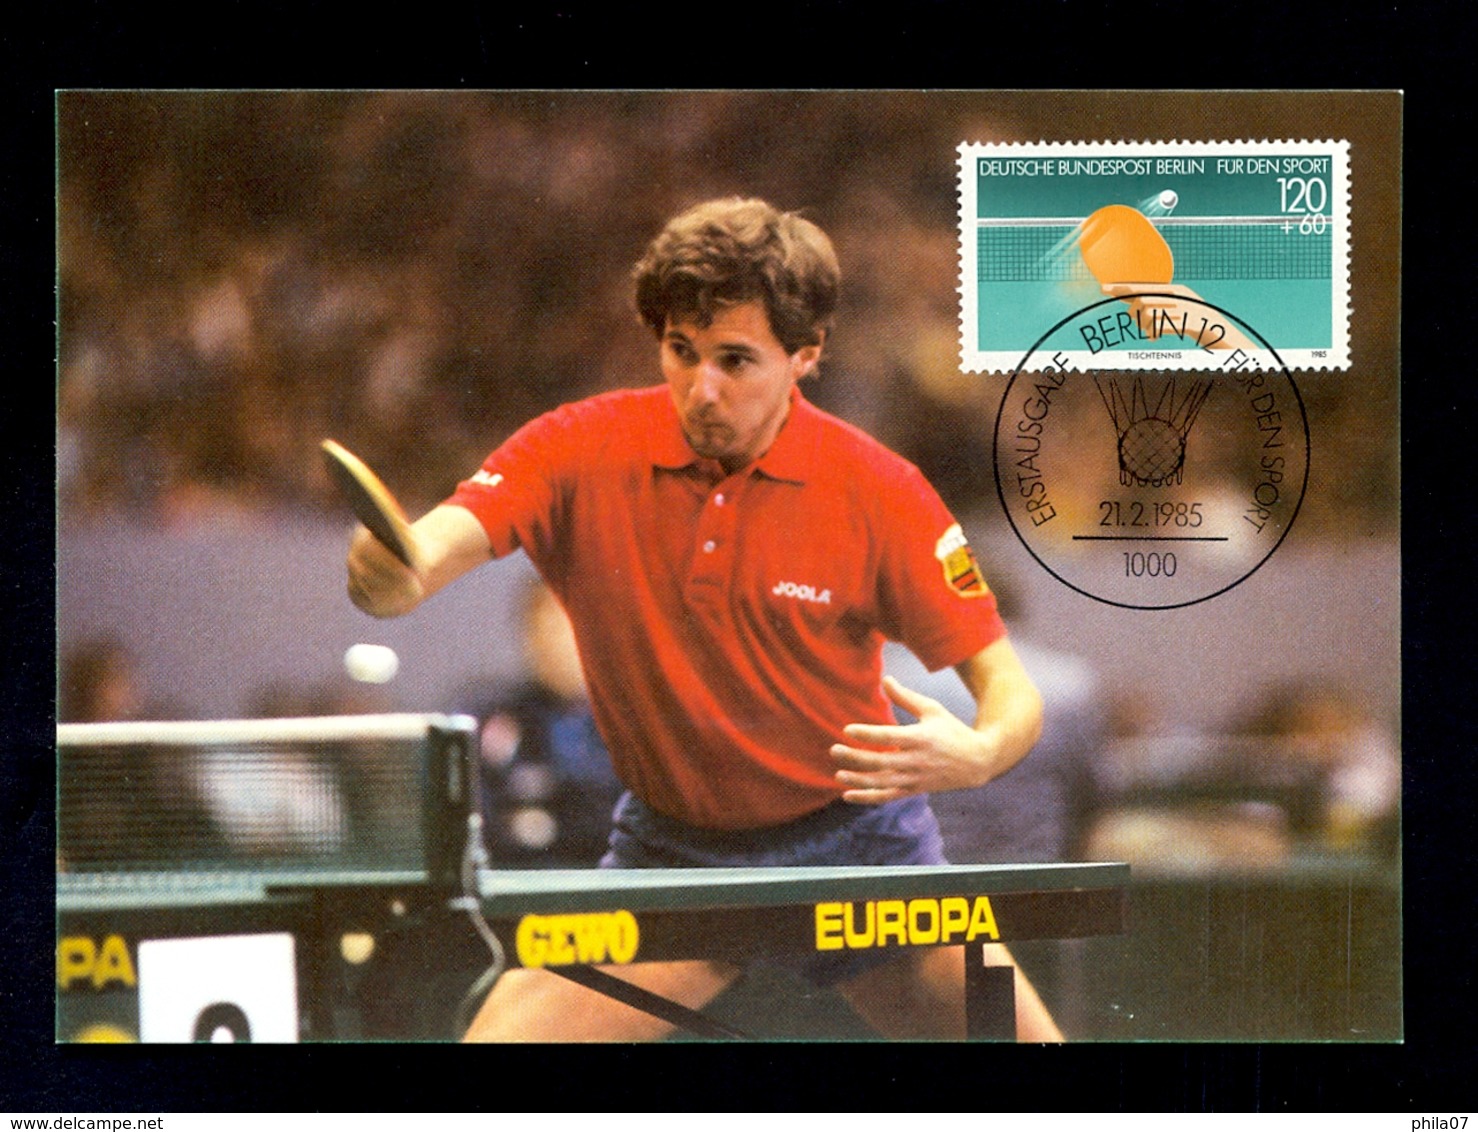 GERMANY 1985 - Commemorative Card, Cancel And Stamp For TABLE TENNIS - Tennis De Table